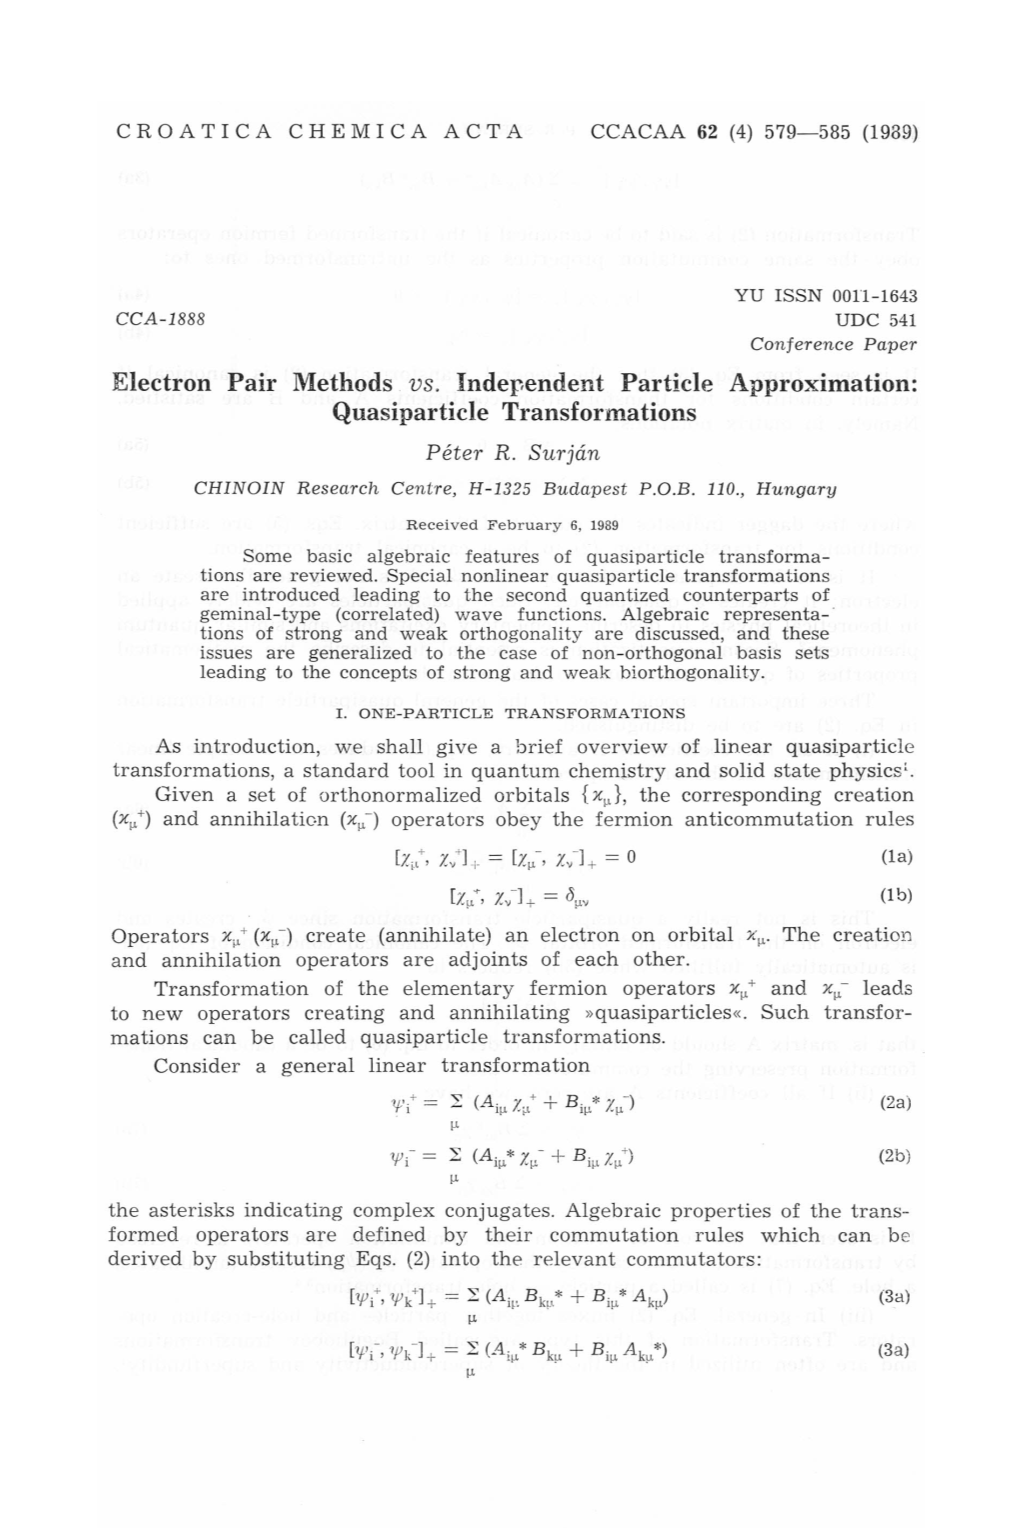 Quasiparticle Transformations Peter R